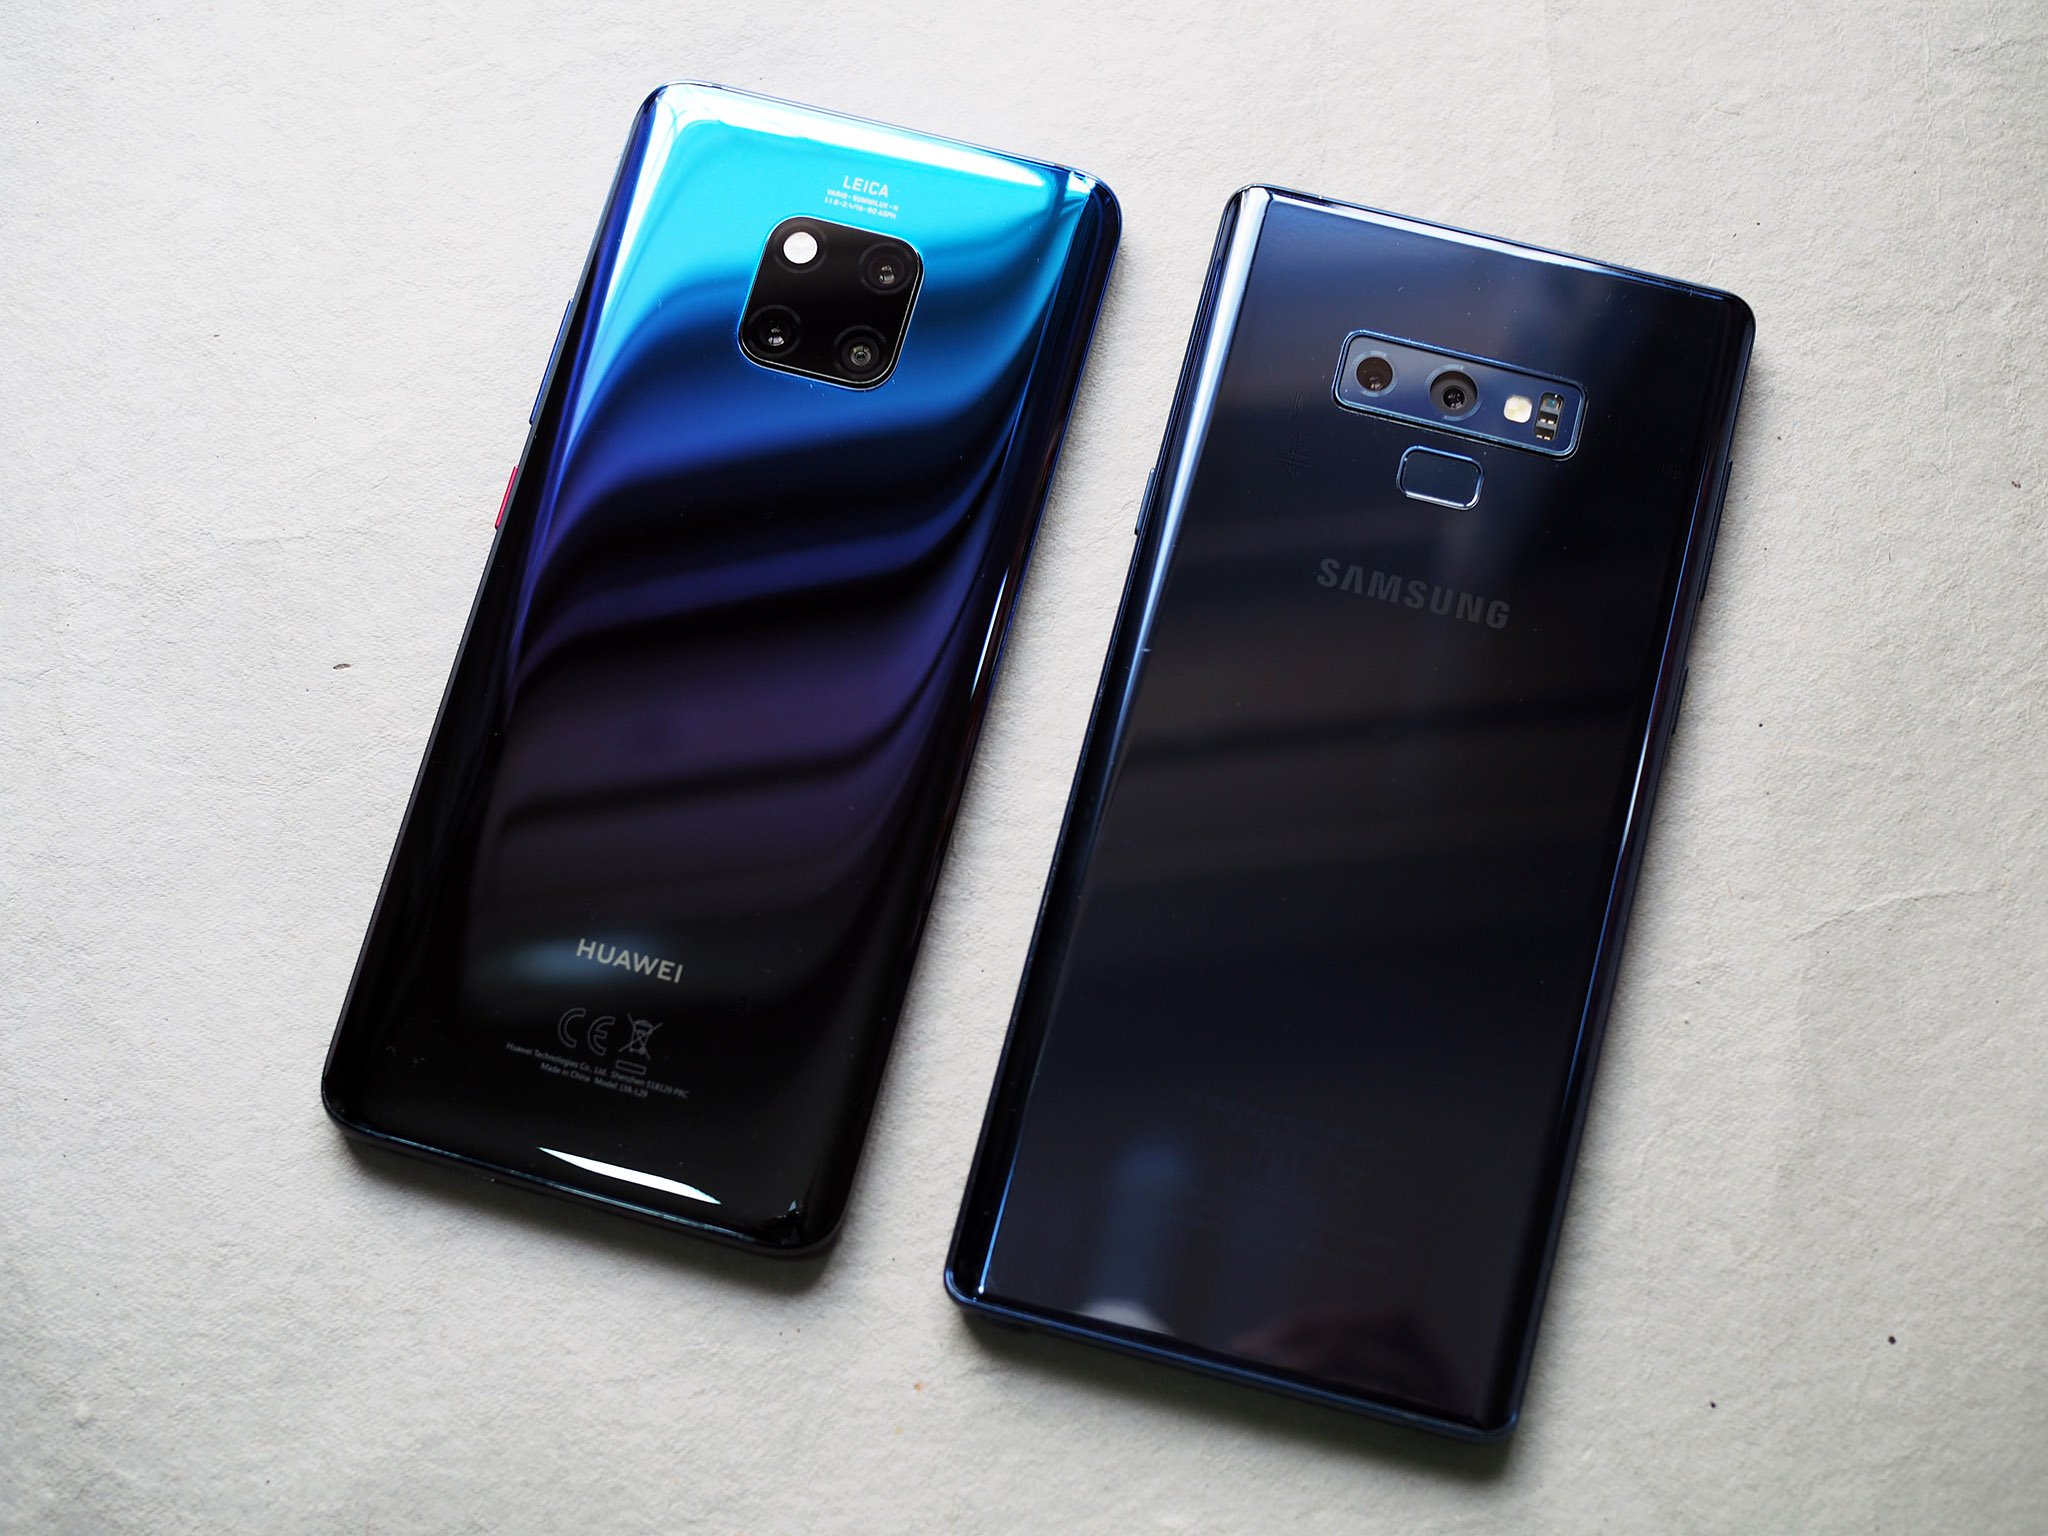 Regelen moreel Teleurgesteld Huawei Mate 20 Pro vs. Samsung Galaxy Note 9: Which should you buy? |  Android Central